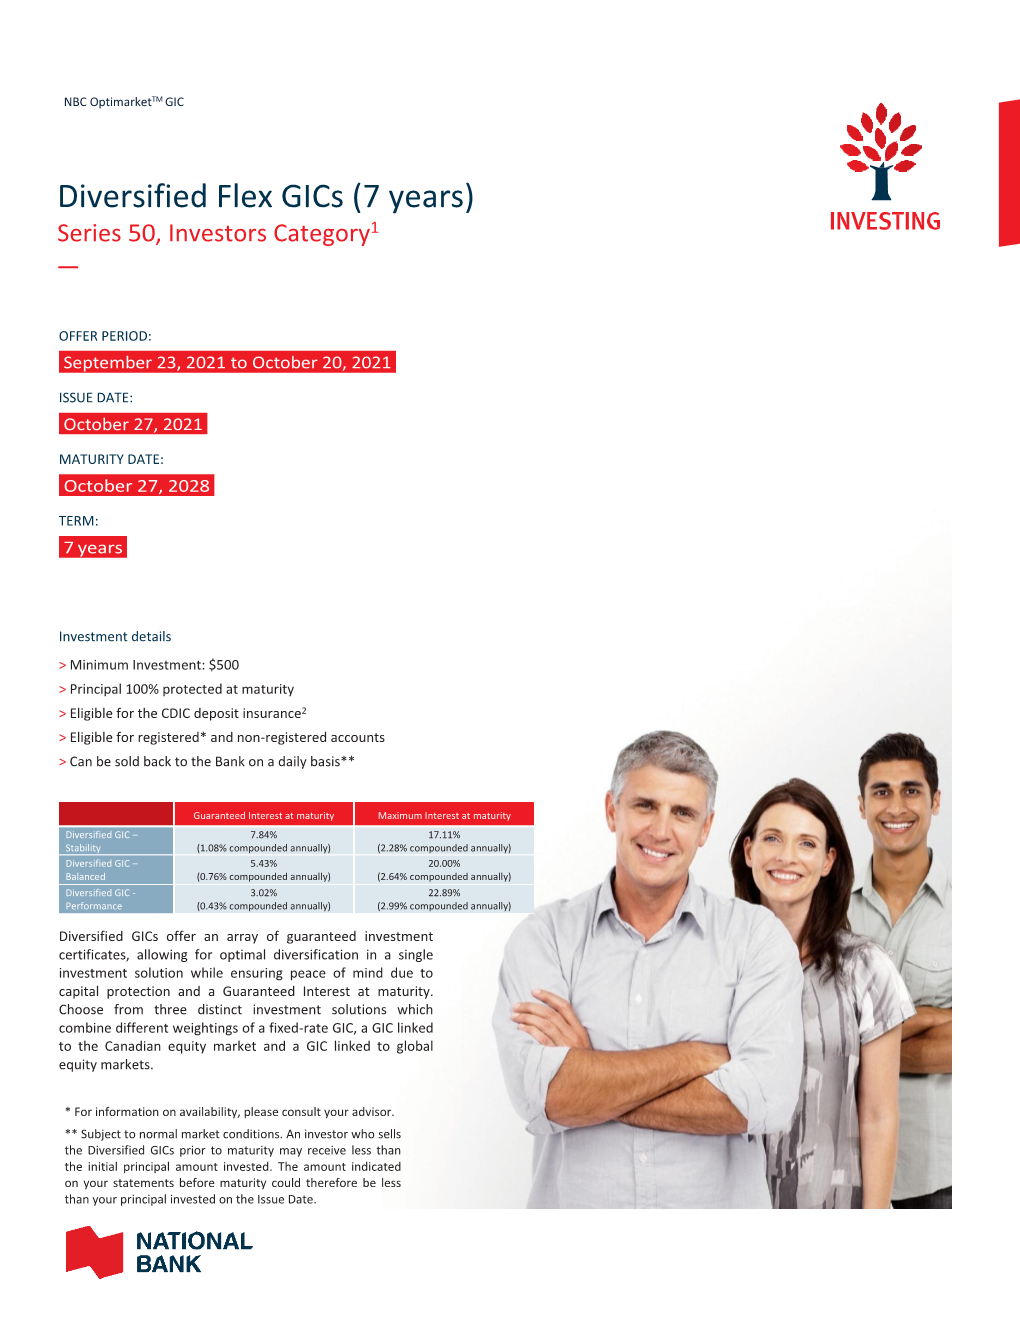 Diversified Flex Gics (7 Years) 1 Series 50, Investors Category —